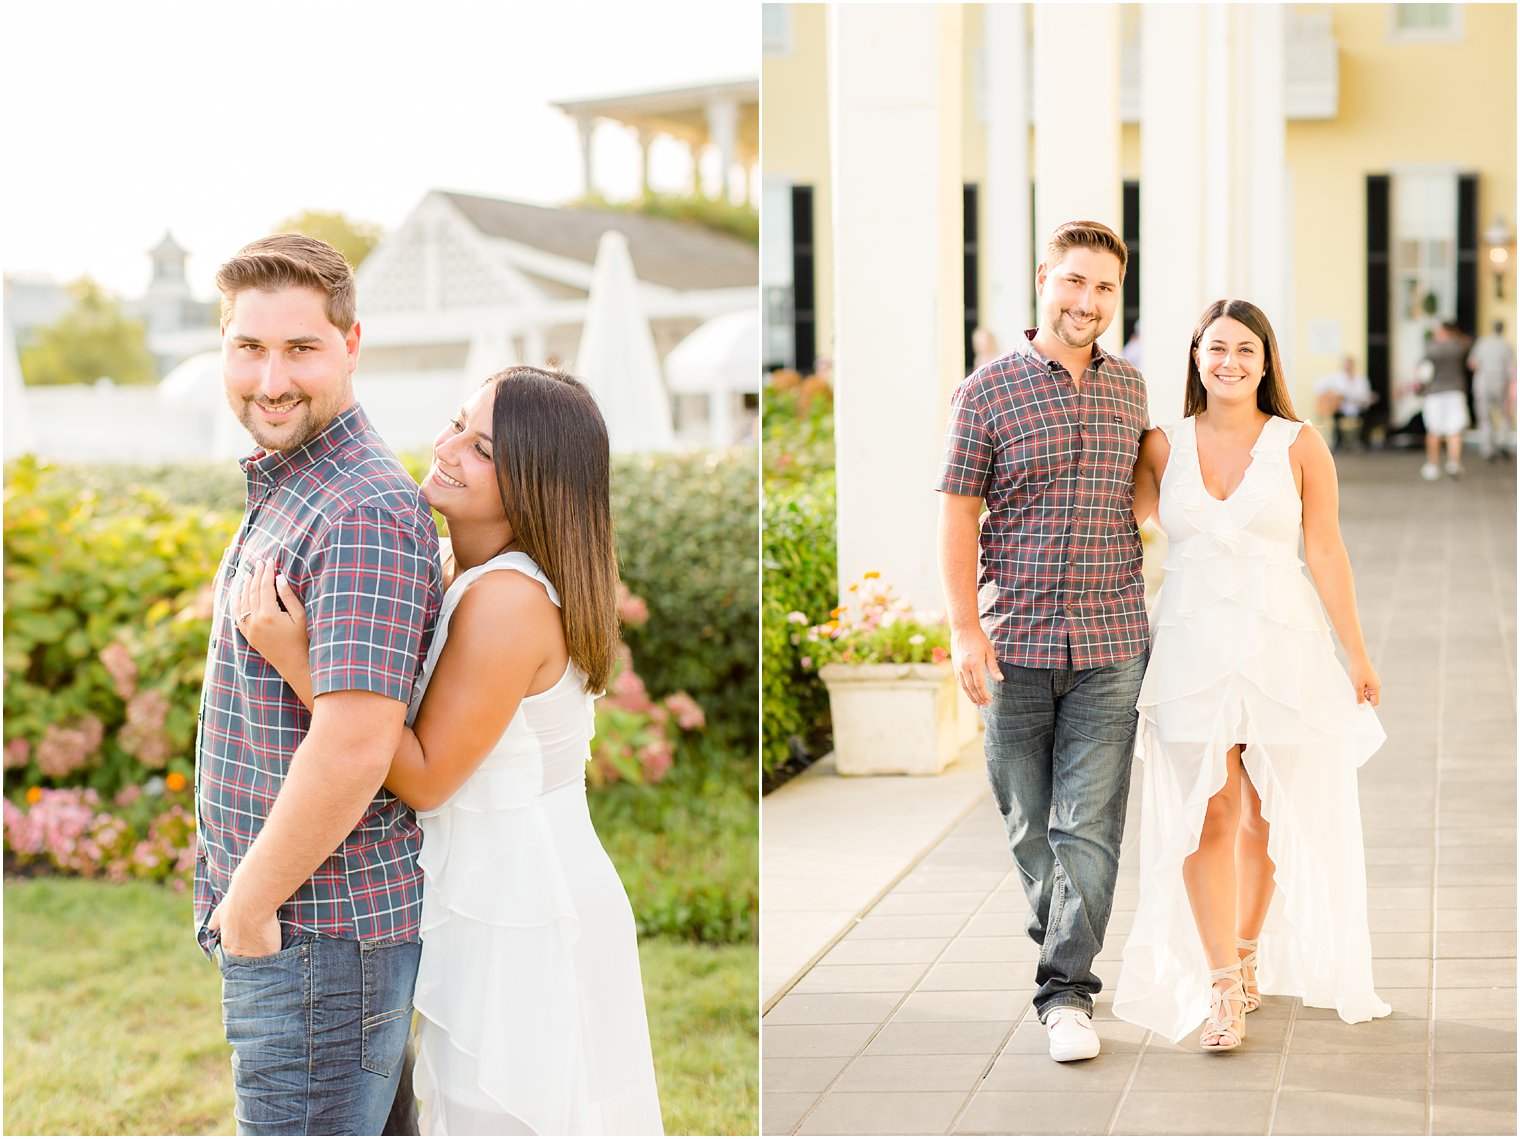 Summer engagement photo ideas in Cape May